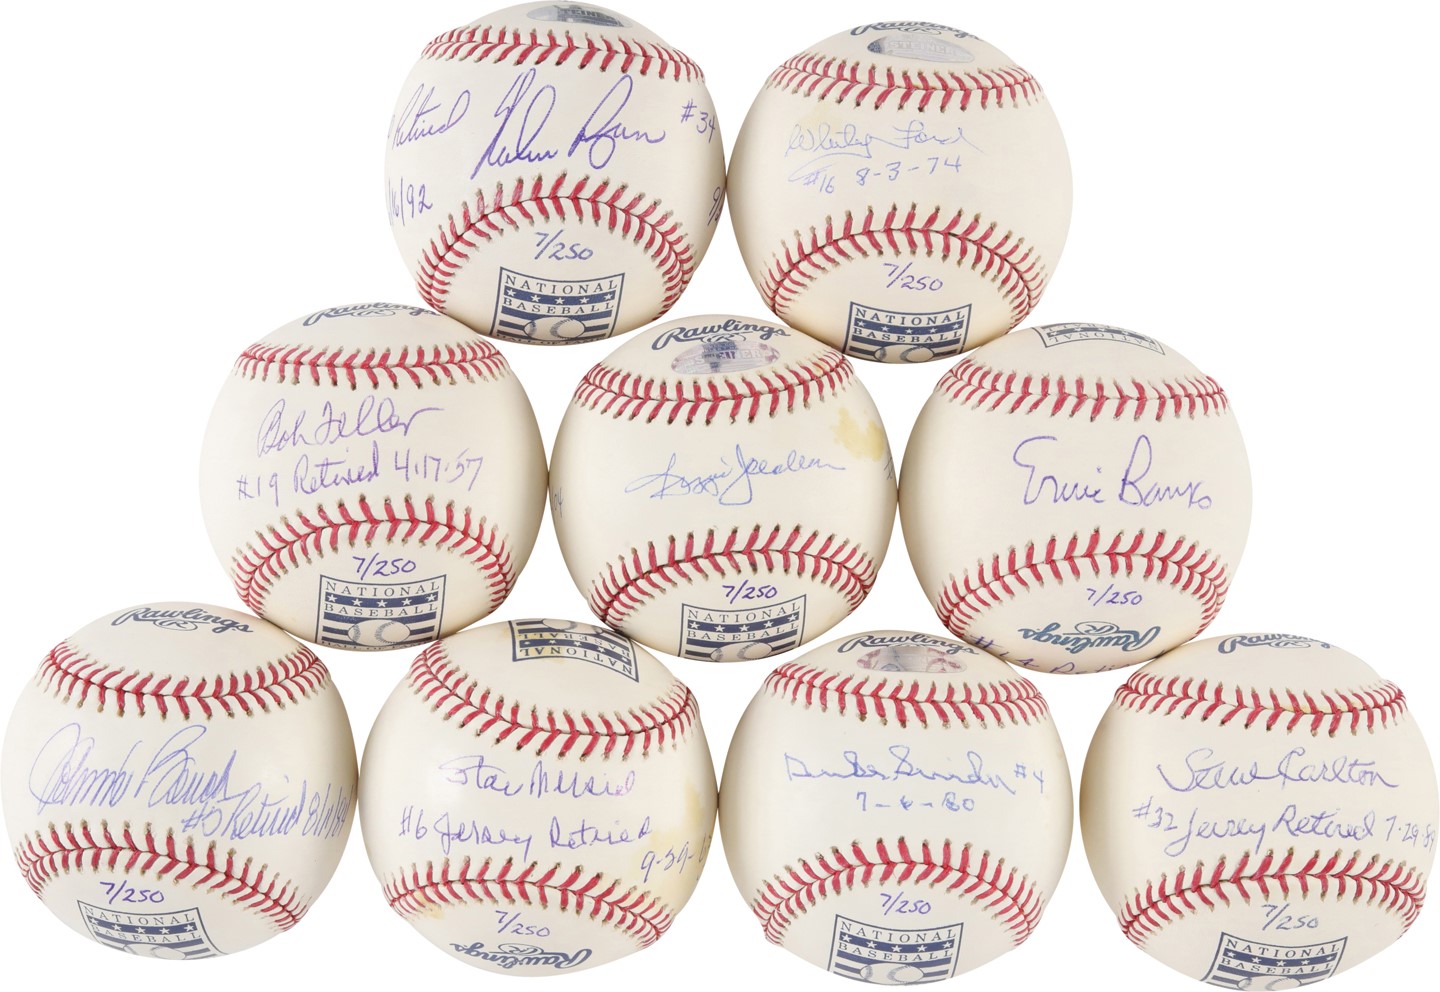 - Beautiful Hall of Famer Signed Inscribed Retired Jersey Number Baseball Collection - Each LE 7/250 (15)